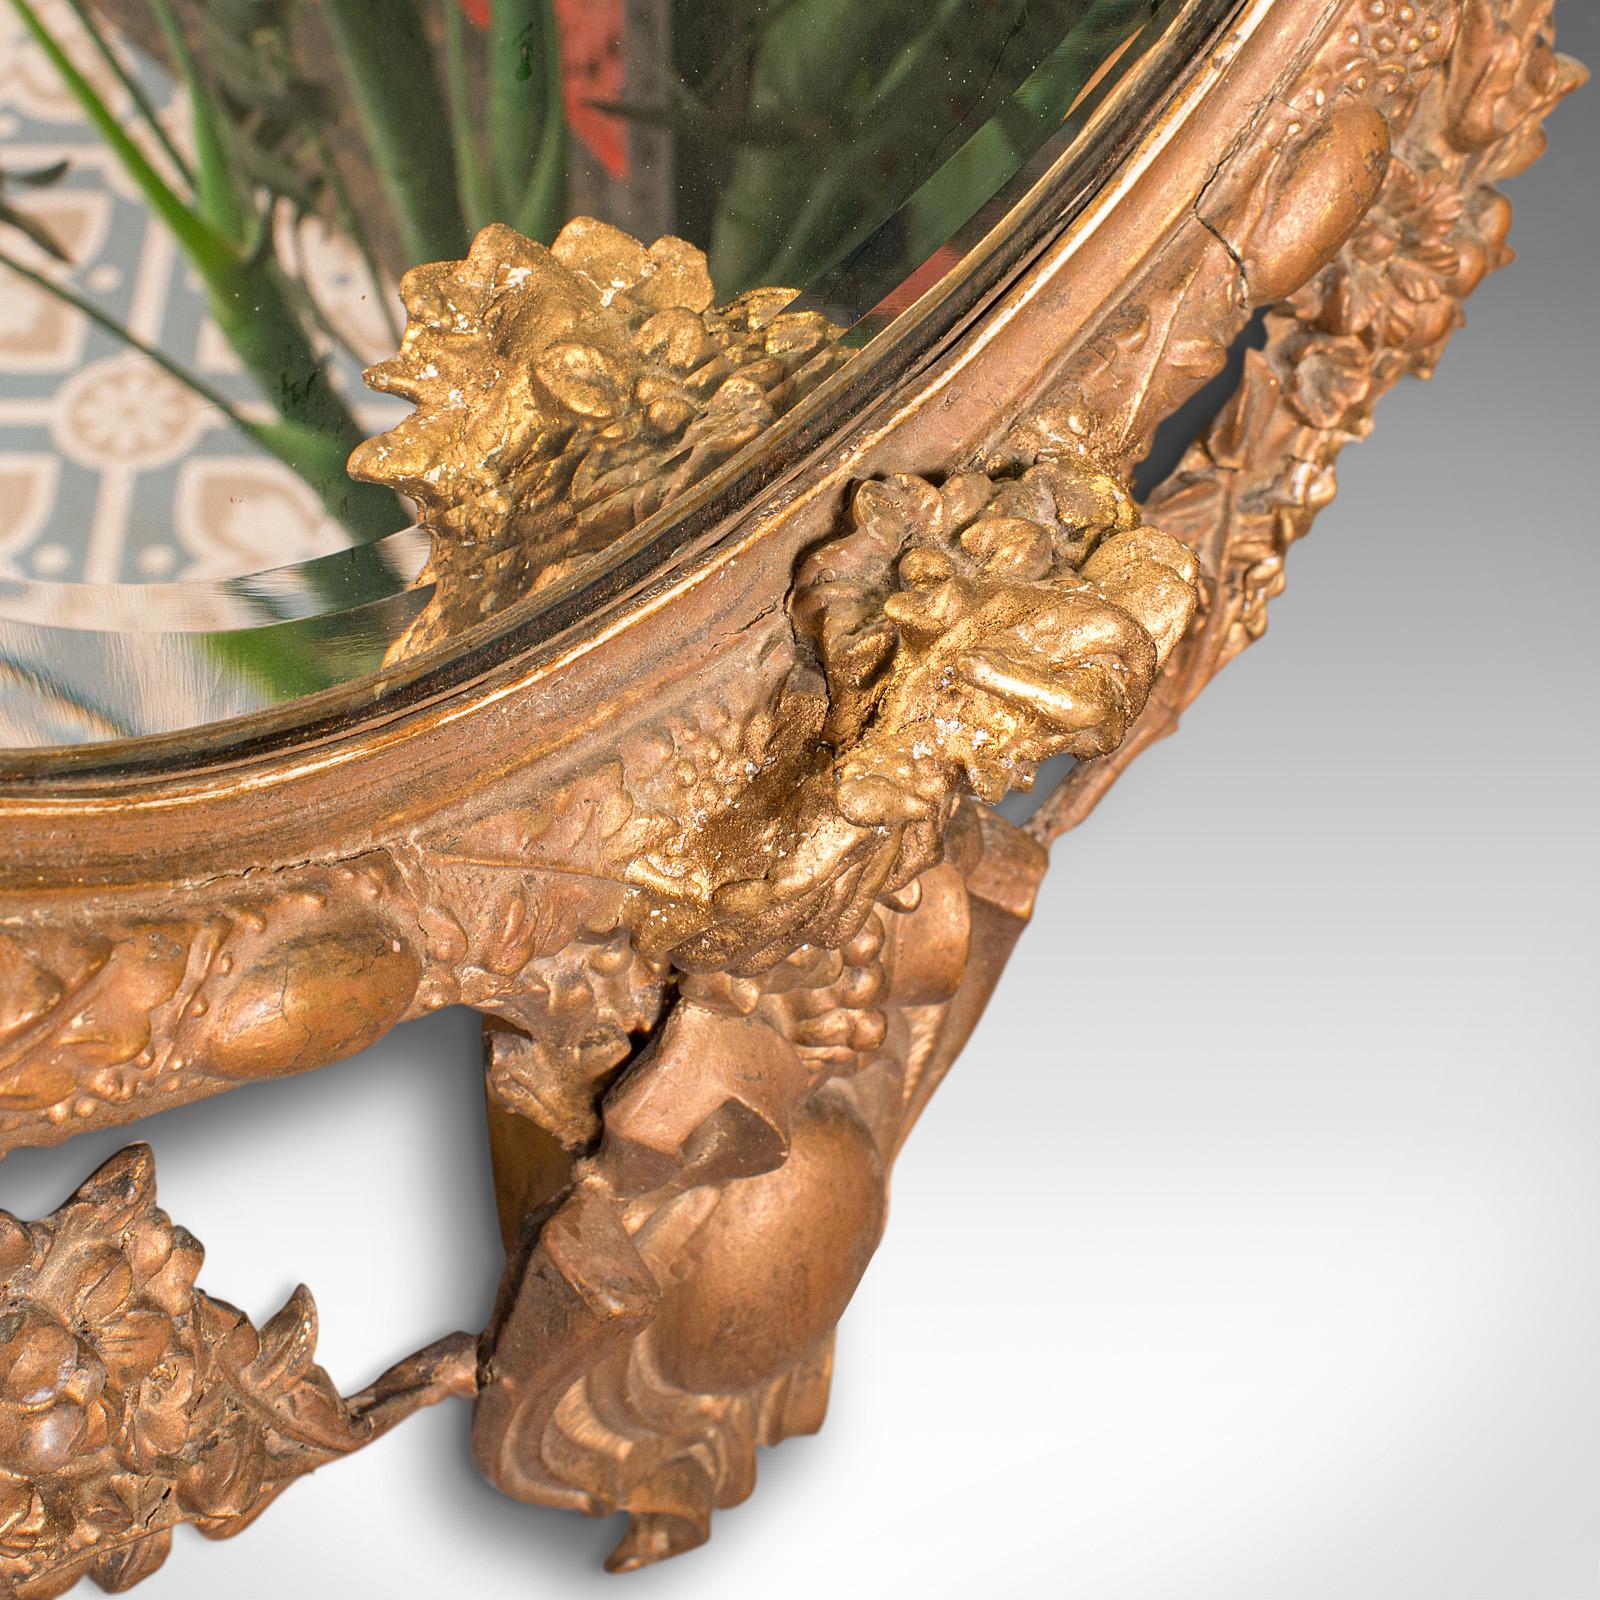 Antique Ornate Wall Mirror, French, Gilt Gesso, Bevelled Glass, Victorian, 1900 For Sale 4